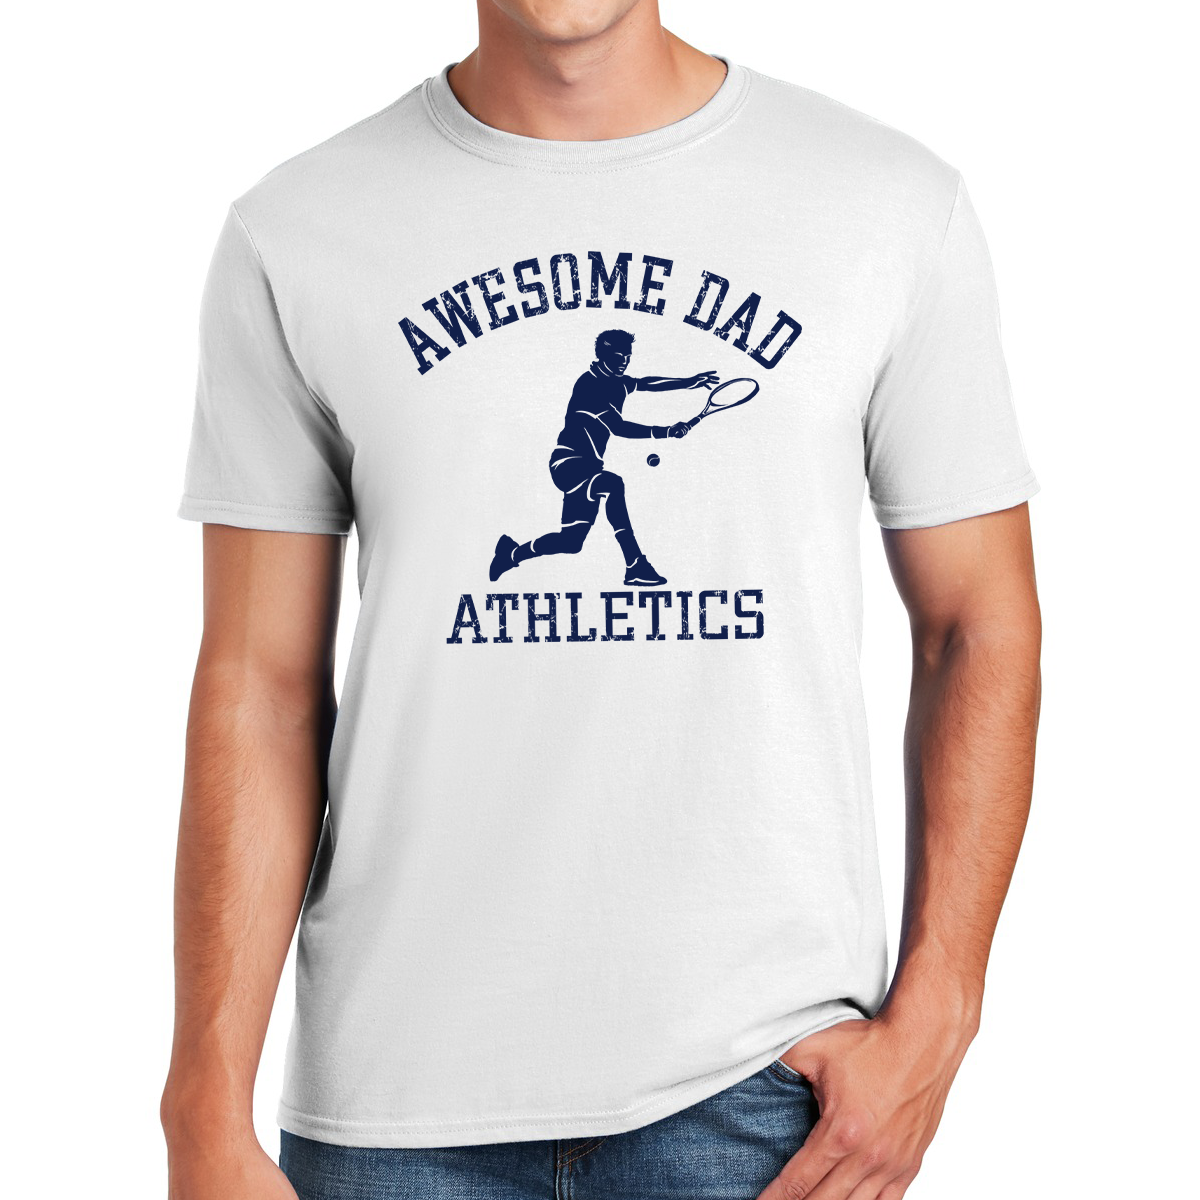 Awesome Dad Athletics Tennis Player Serving Up Style on the Court Gifts for Dads T-shirt